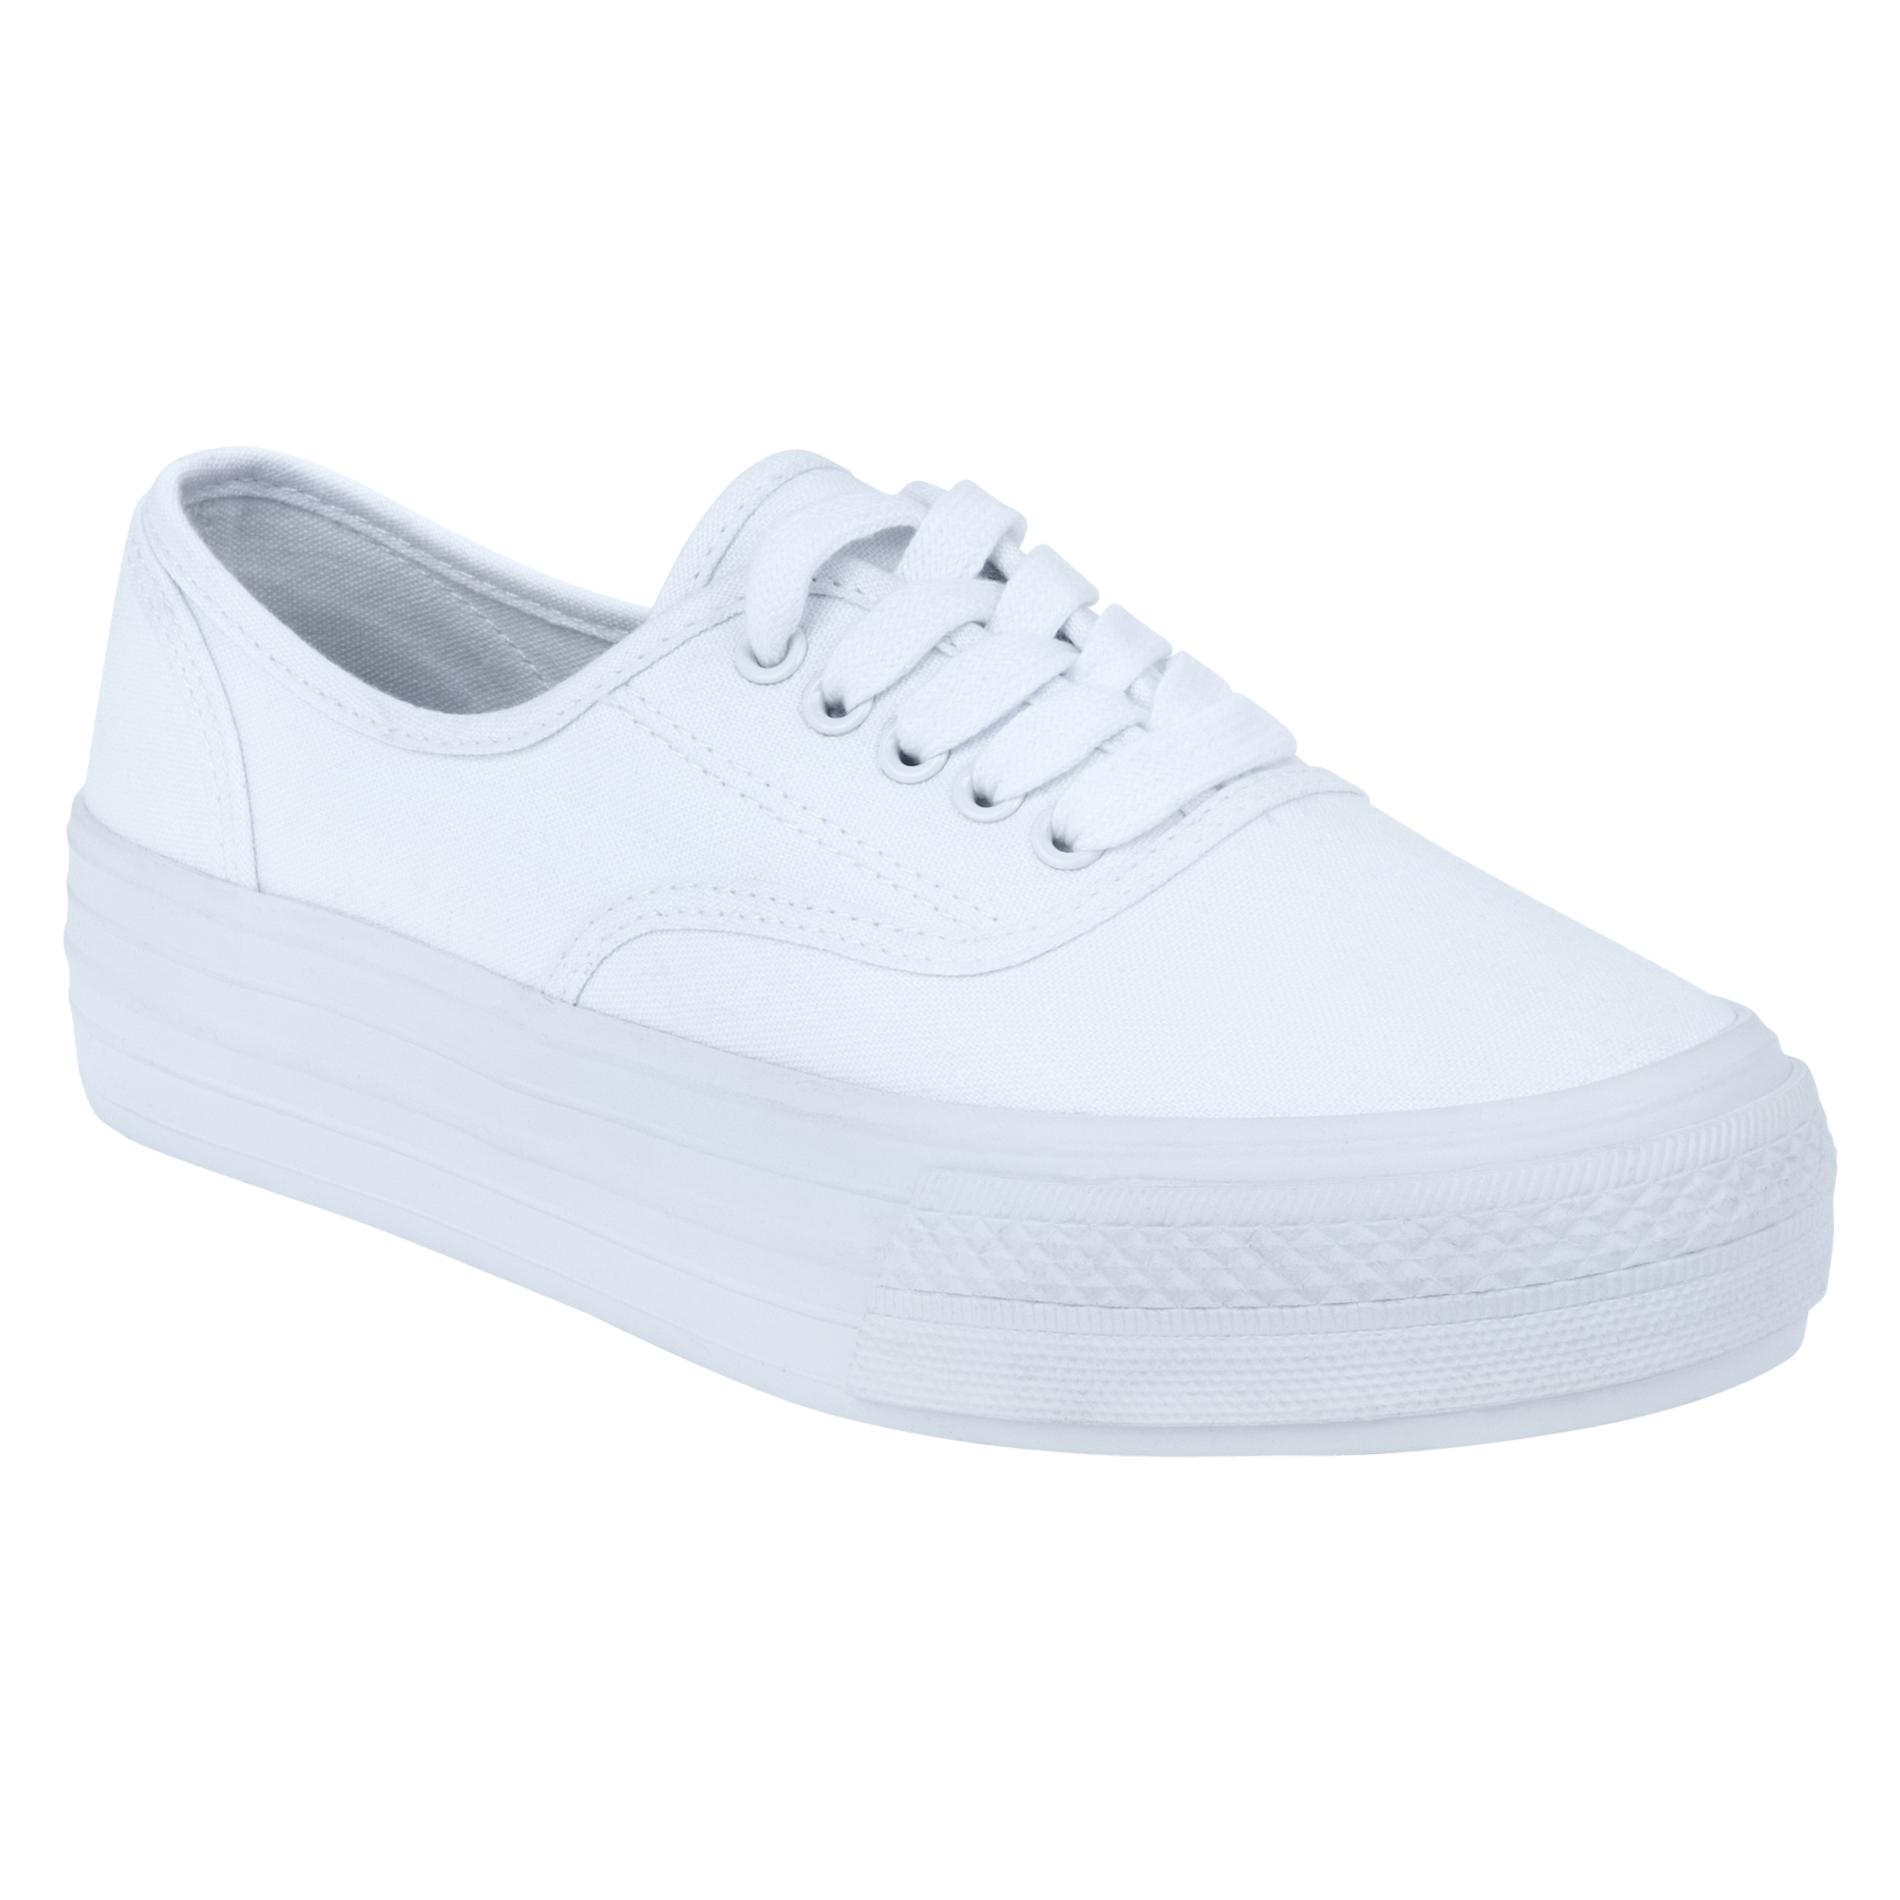 Bongo Women's High Wall Canvas Shoe Difference - White